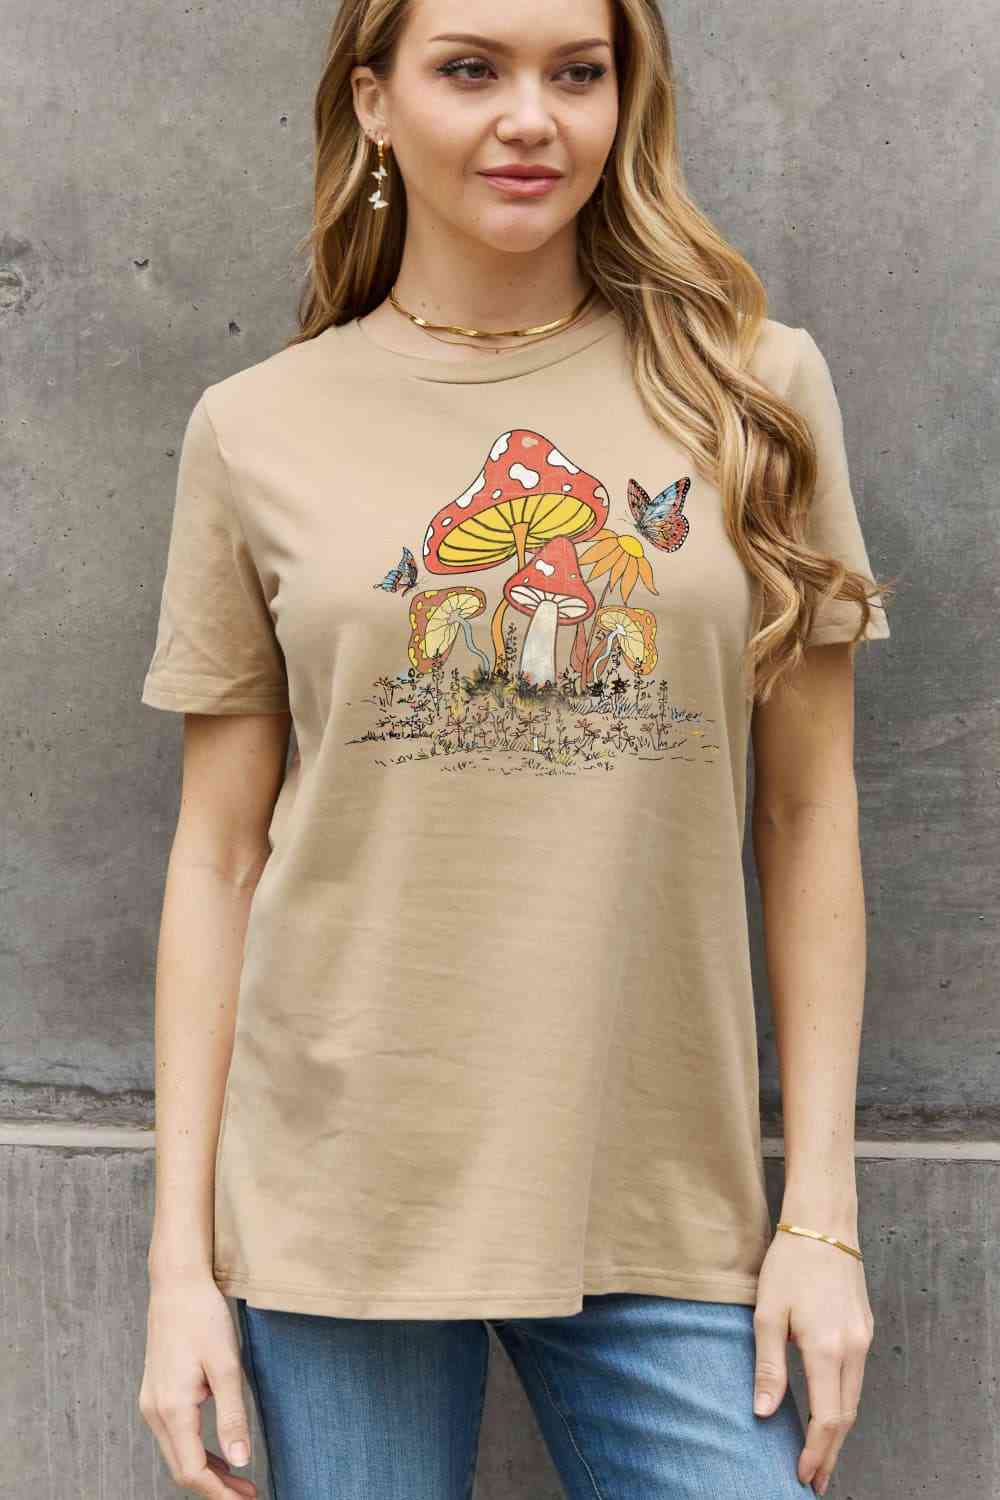 Mushroom & Butterfly Graphic Cotton T-Shirt - Taupe / S - T-Shirts - Shirts & Tops - 1 - 2024